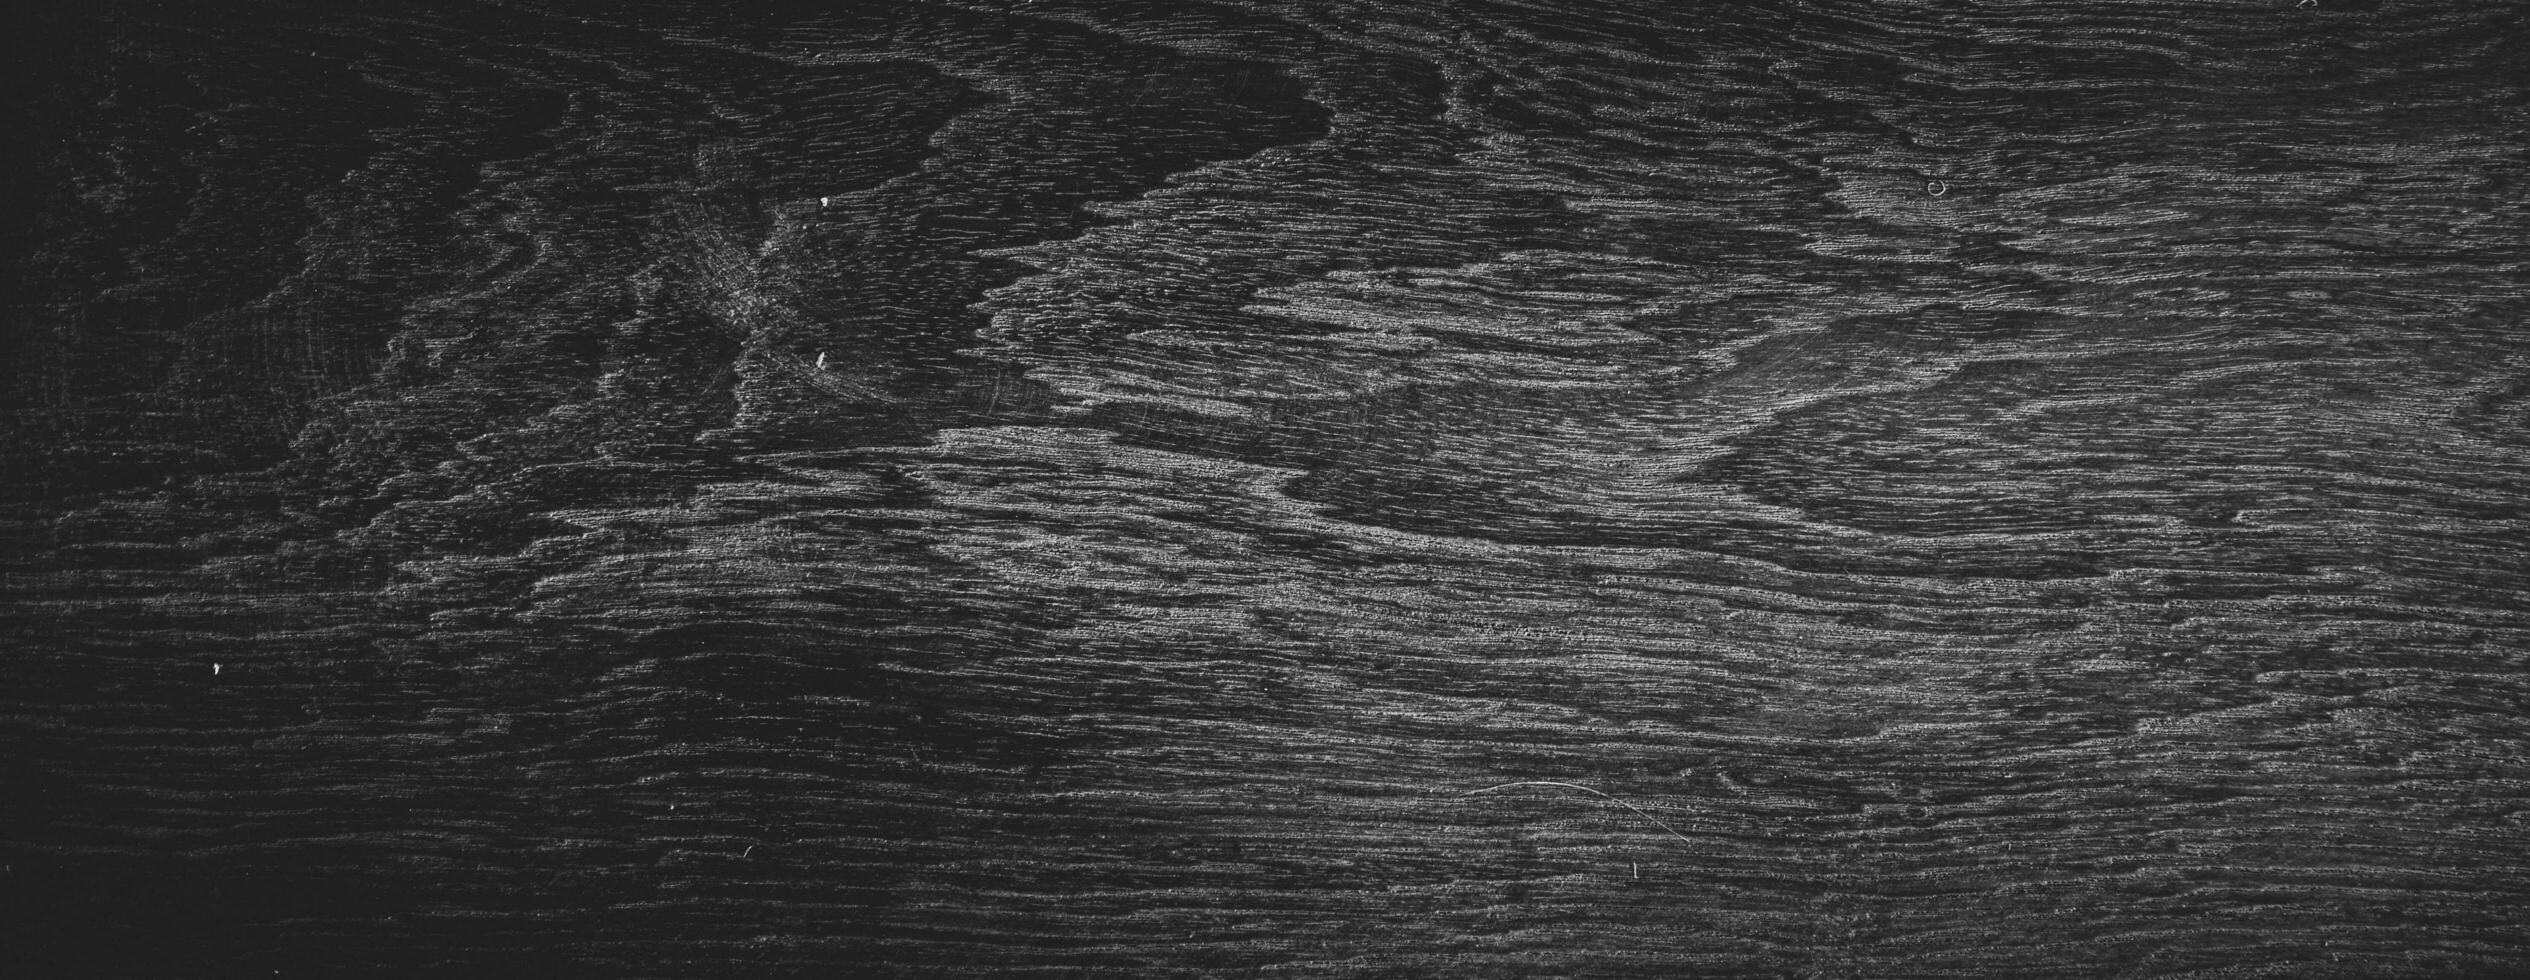 Black and white Old wooden texture abstract background photo